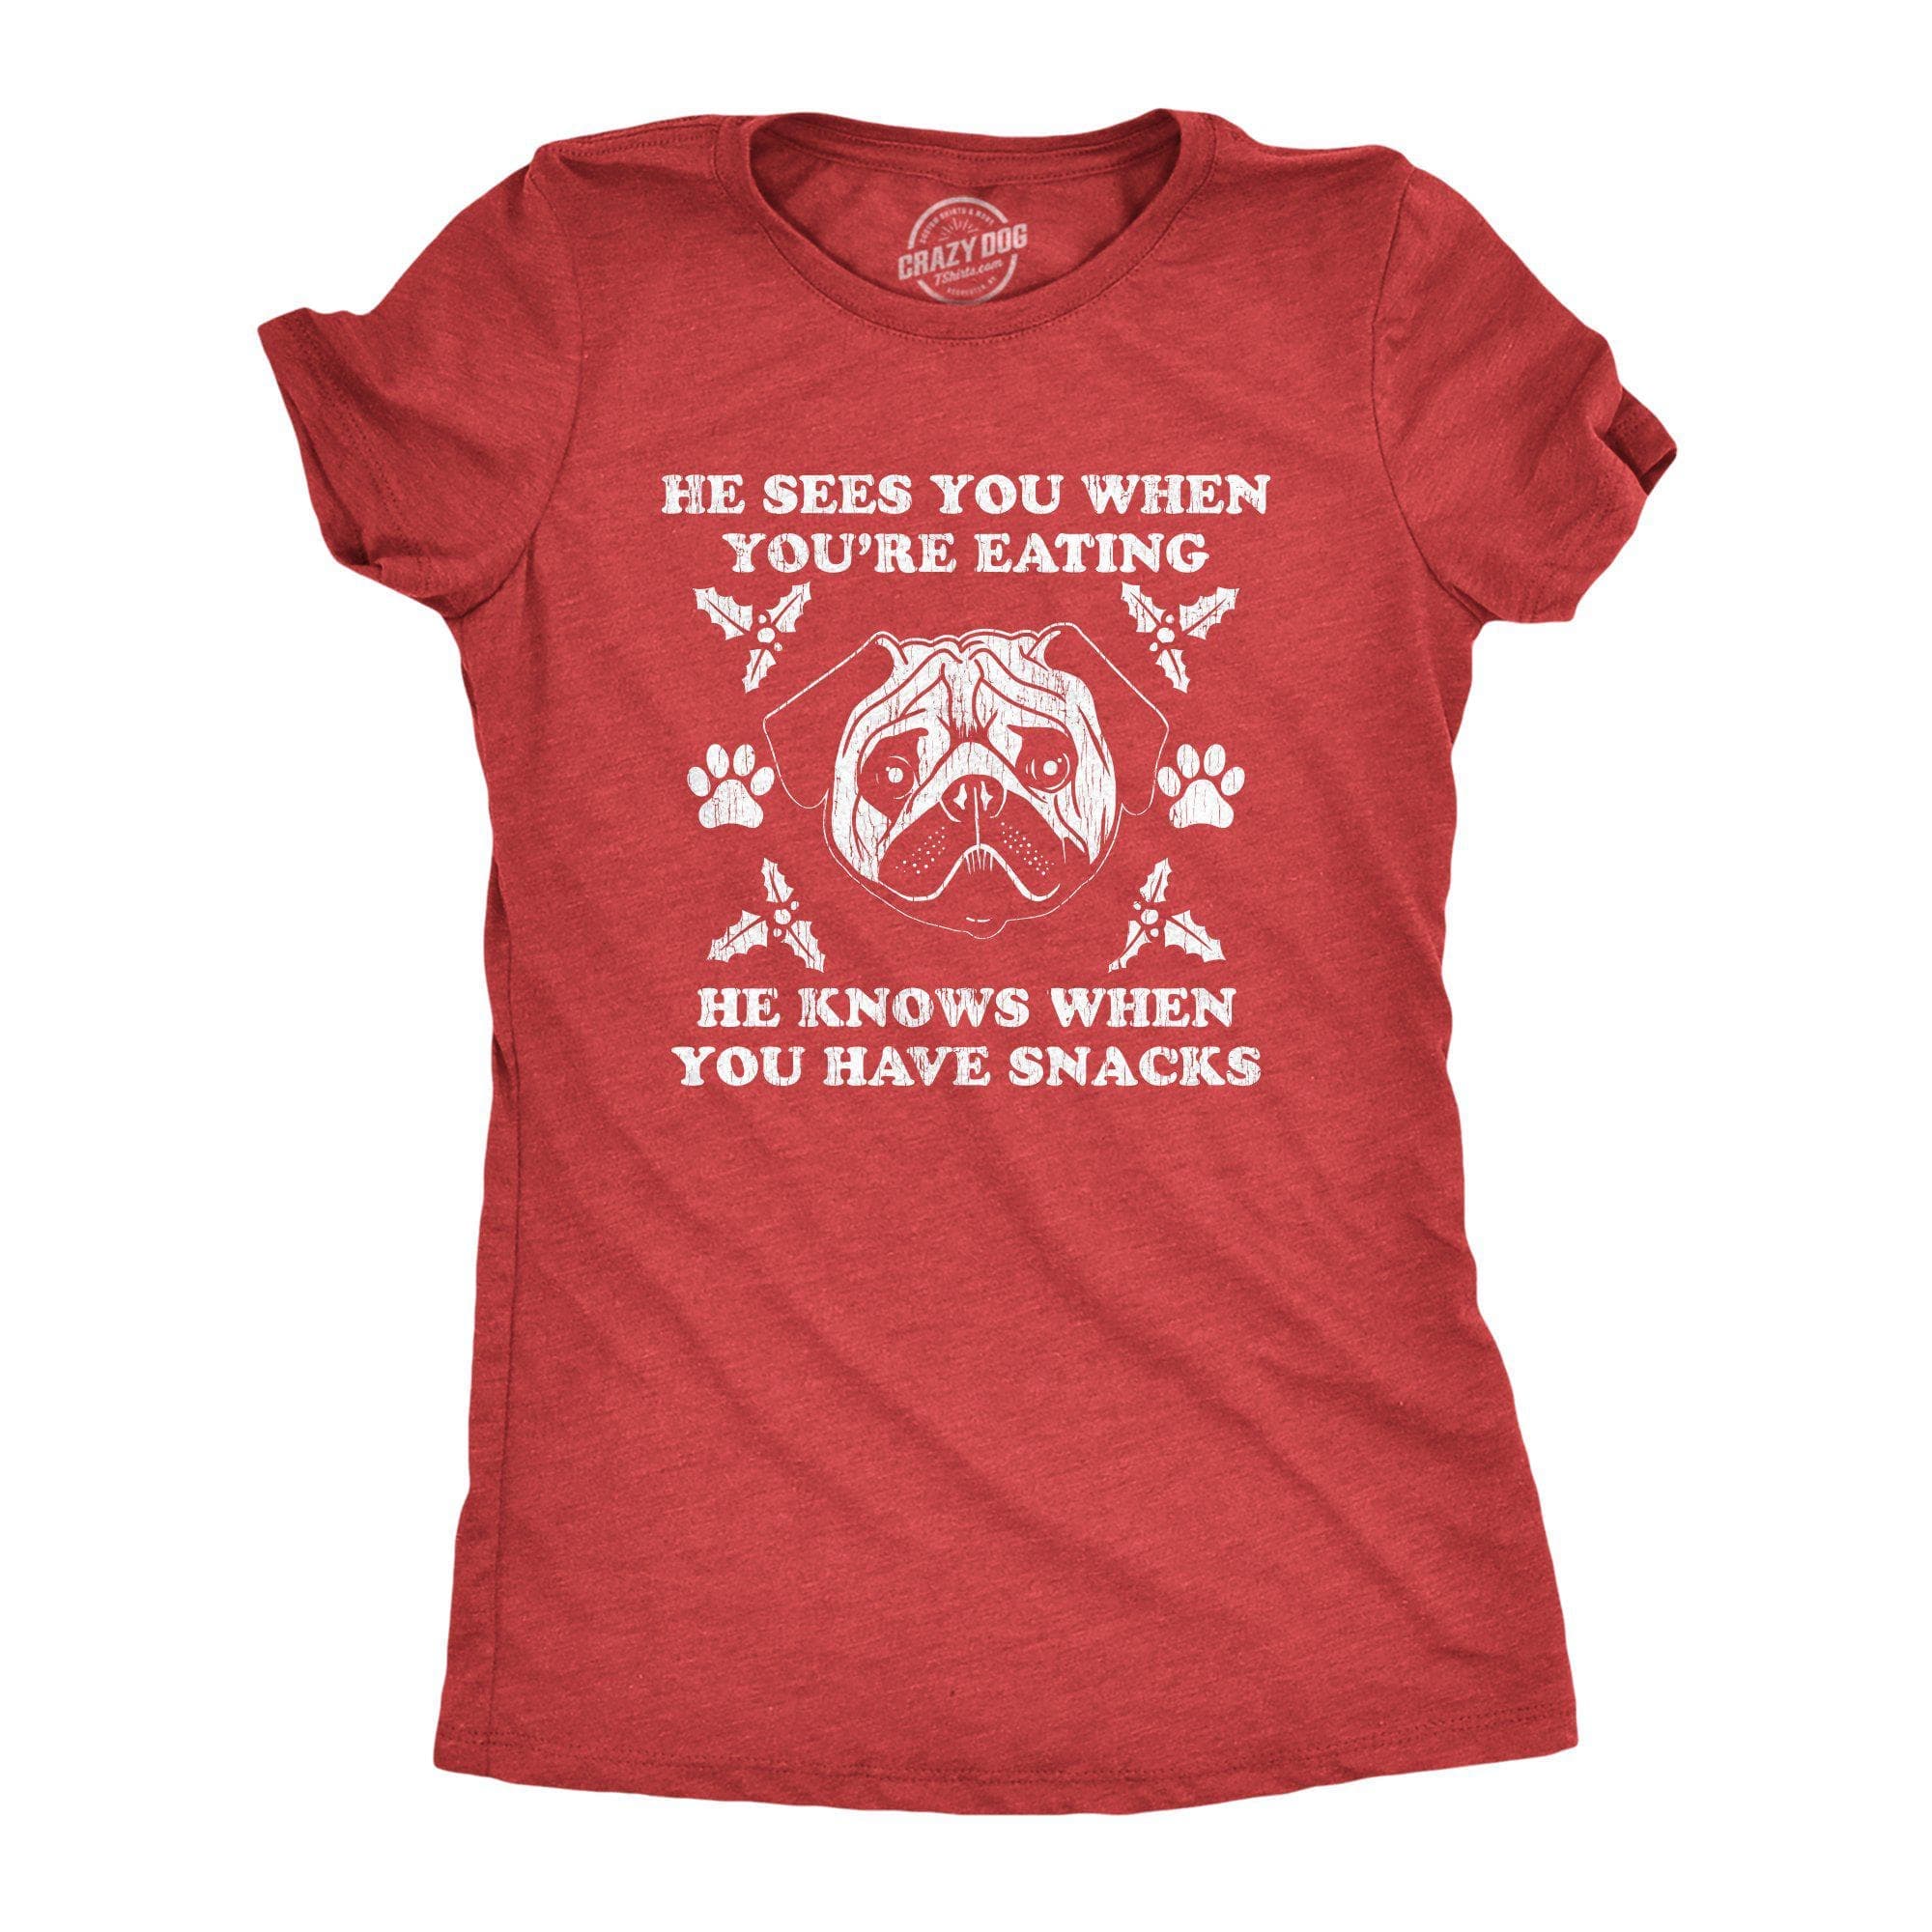 He Sees You When You're Eating Women's Tshirt - Crazy Dog T-Shirts